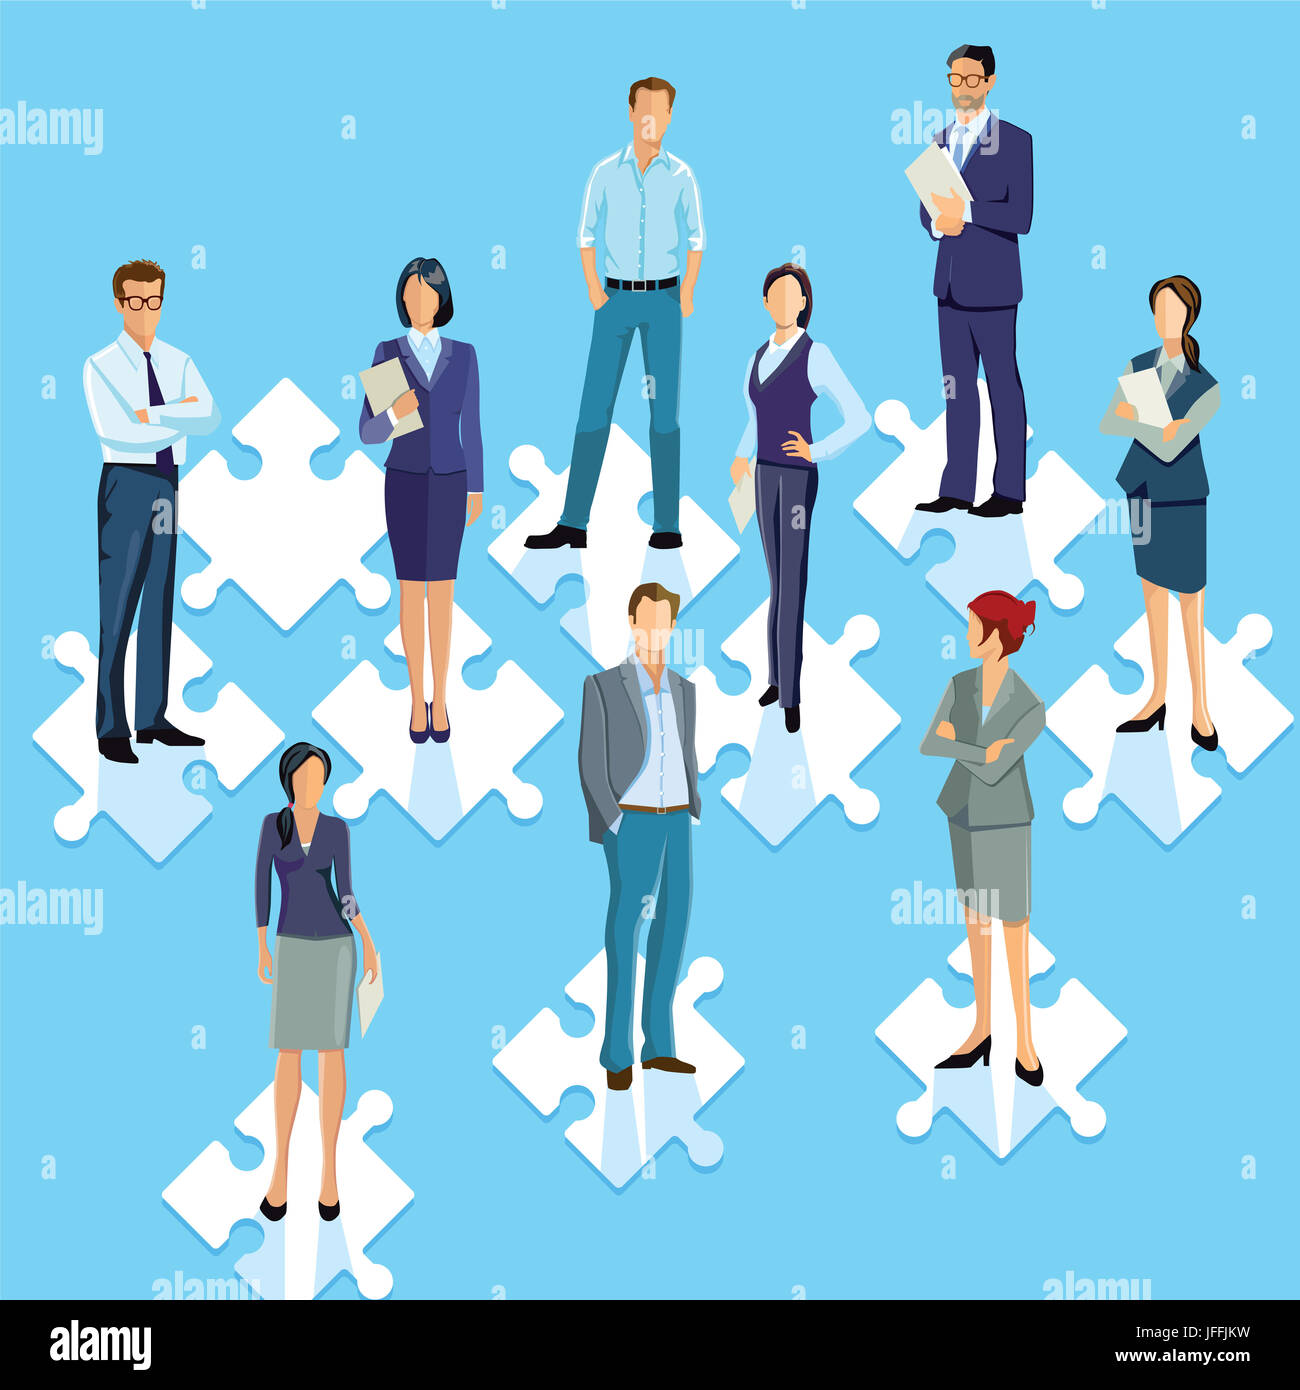 Staff group puzzle connecting illustration Stock Photo